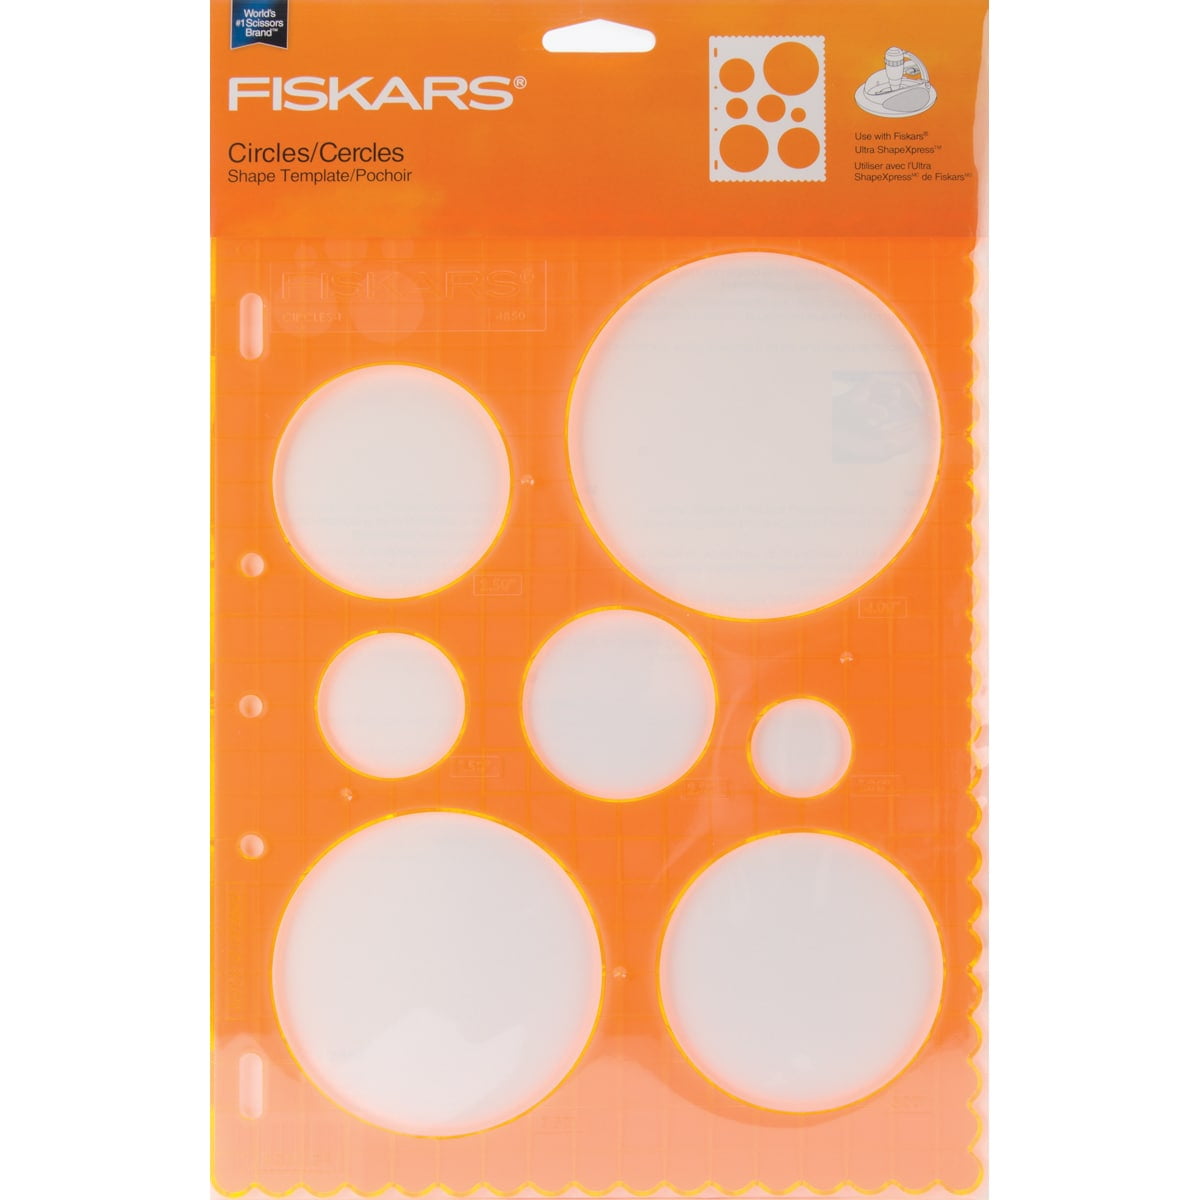 Fiskars Shape Template Stencil Scapbooking Craft Select Your Design Qty Discount 